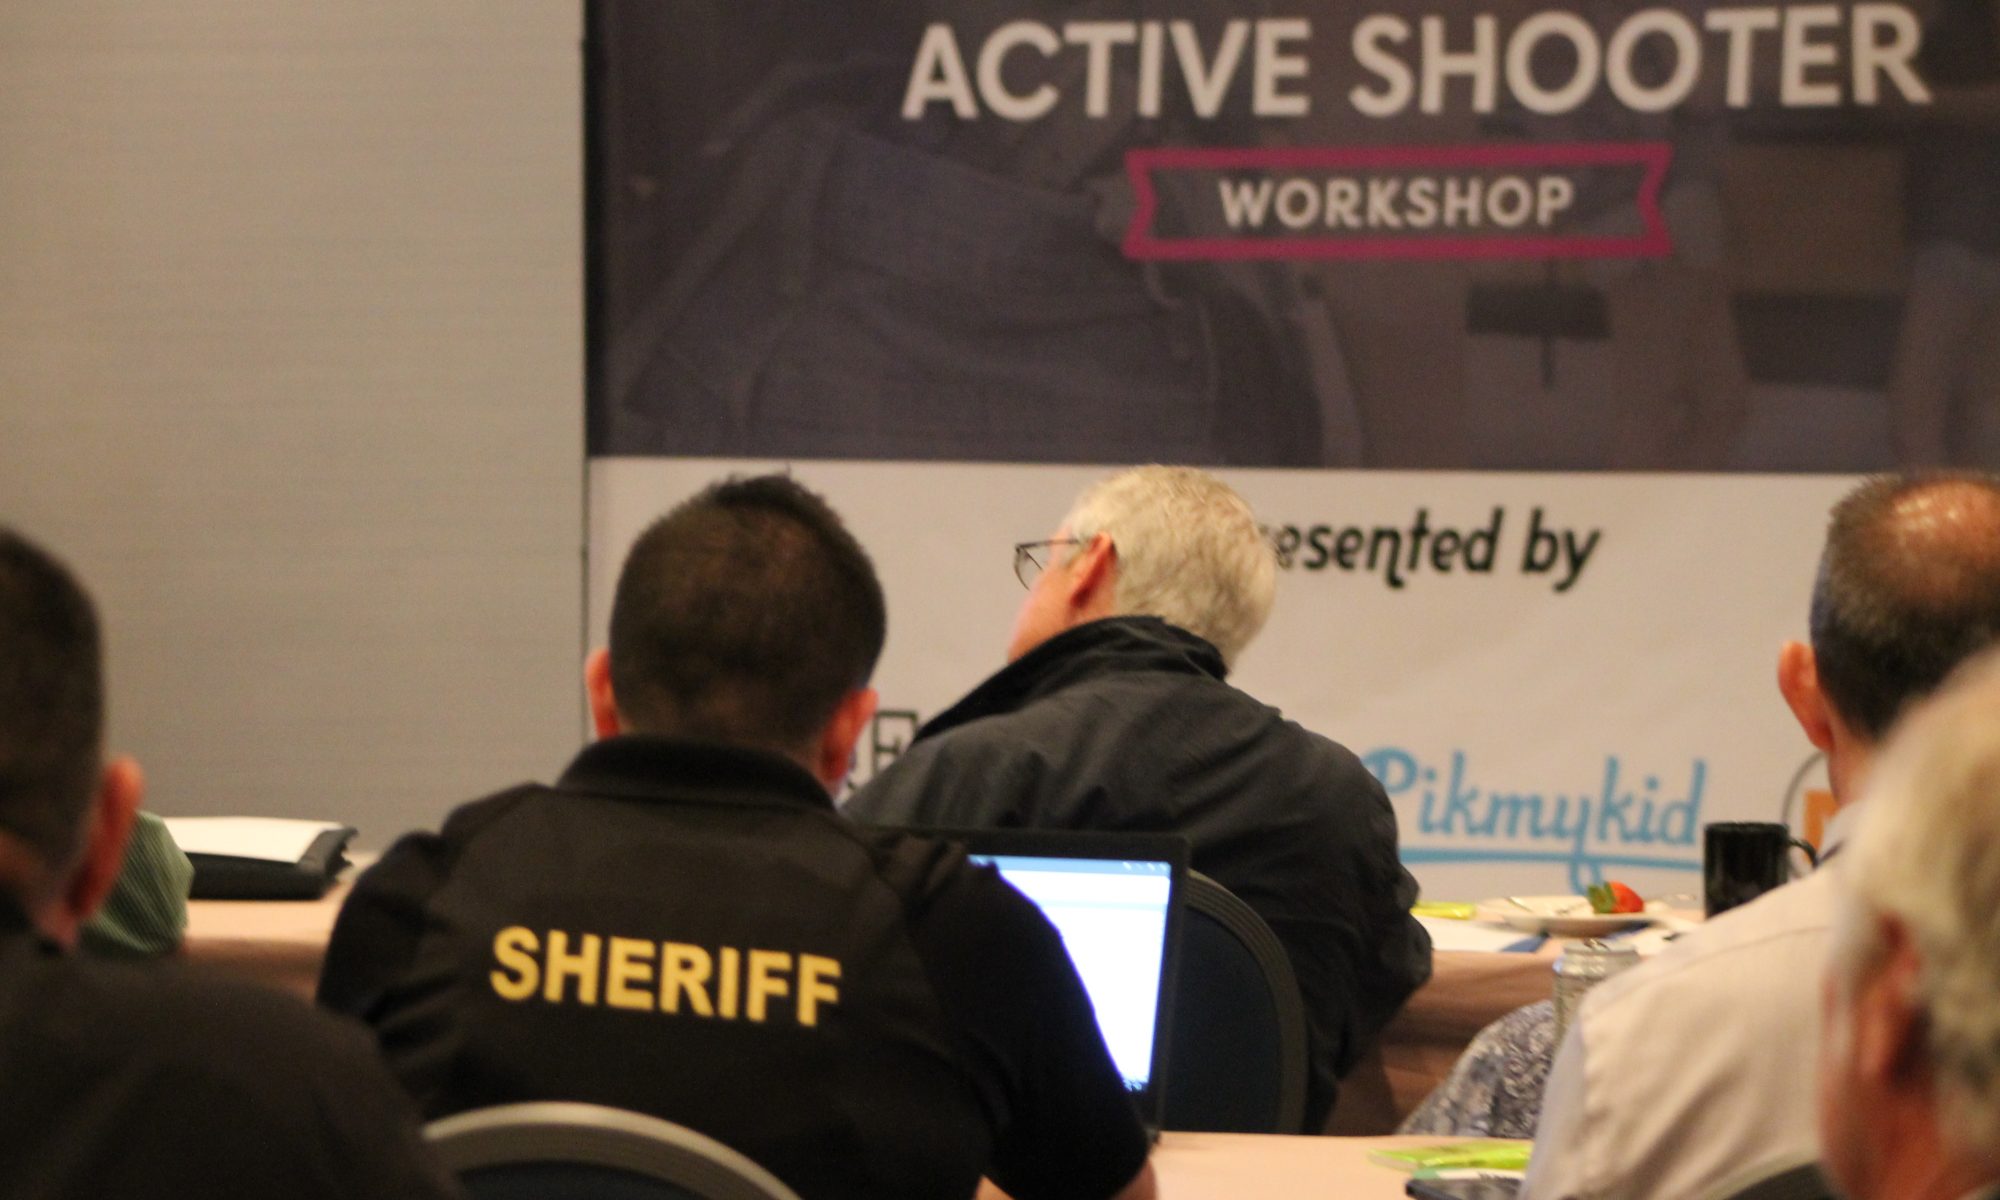 Attendees in their seats for our active shooter workshop